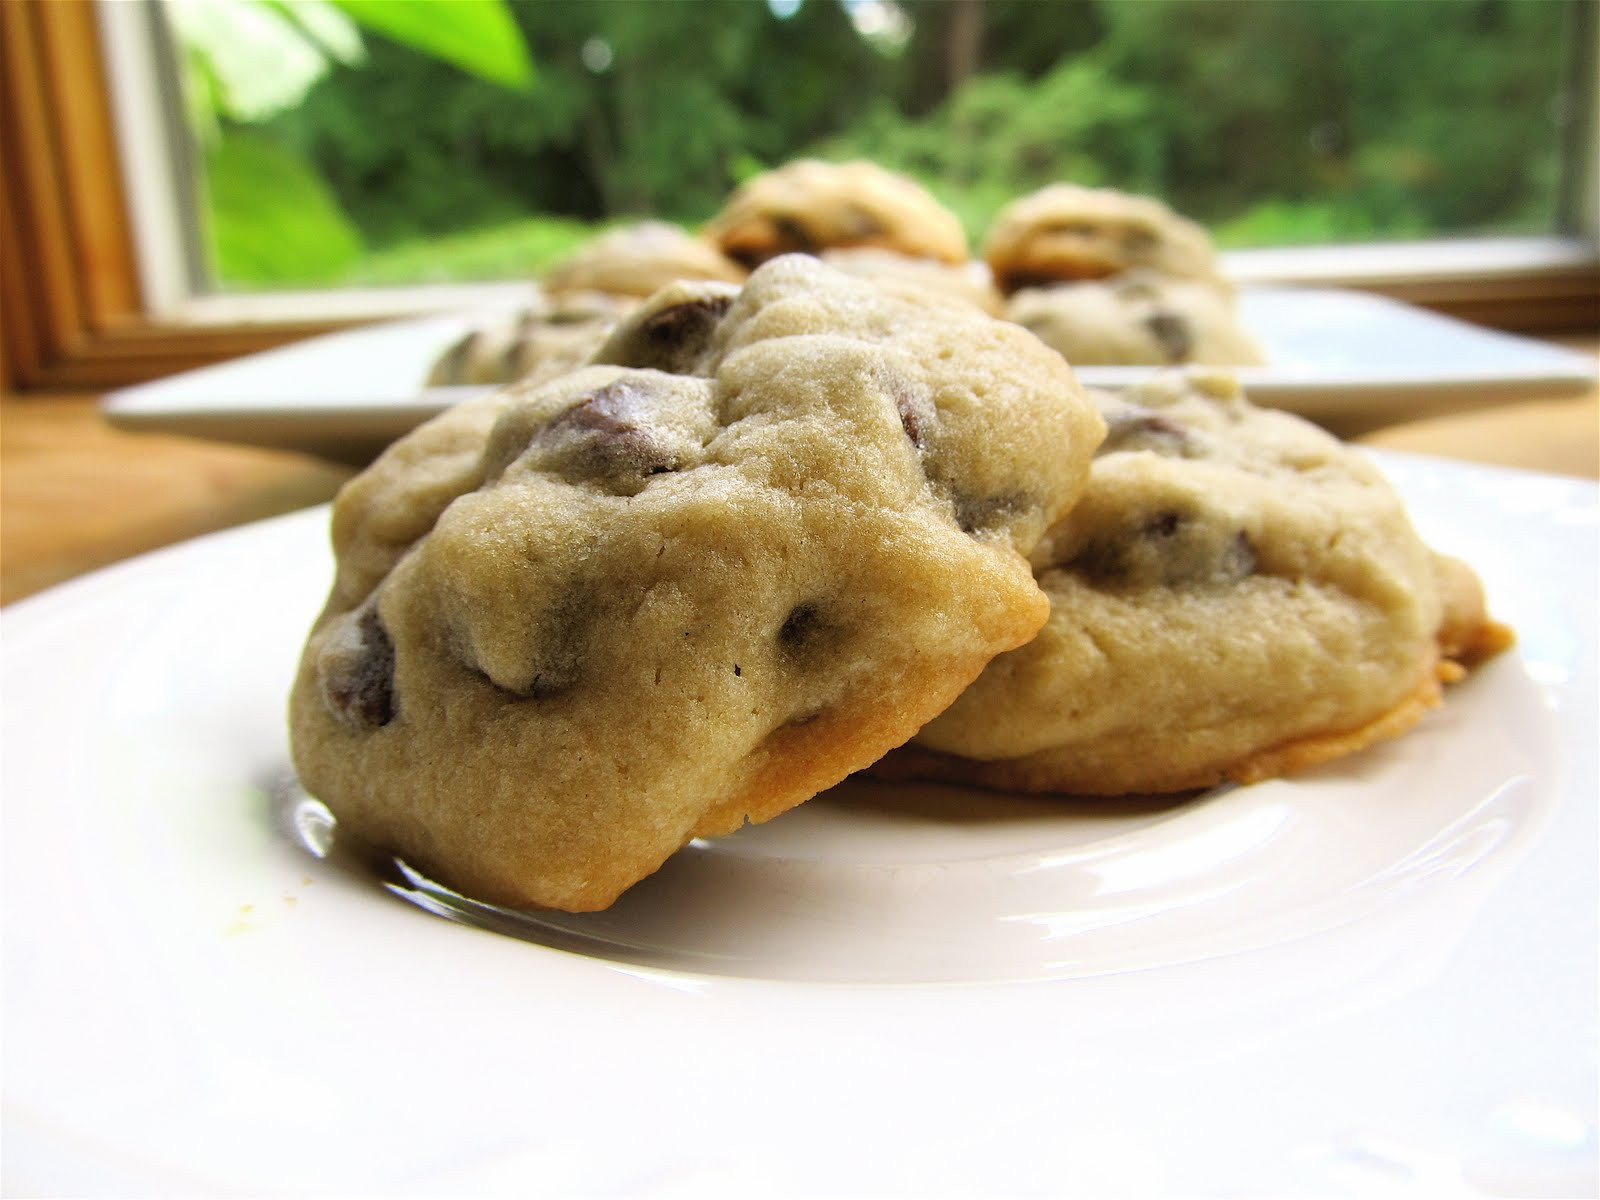 Cakey Chocolate Chip Cookies
 Mary Quite Contrary Bakes Soft and Cakey Chocolate Chip